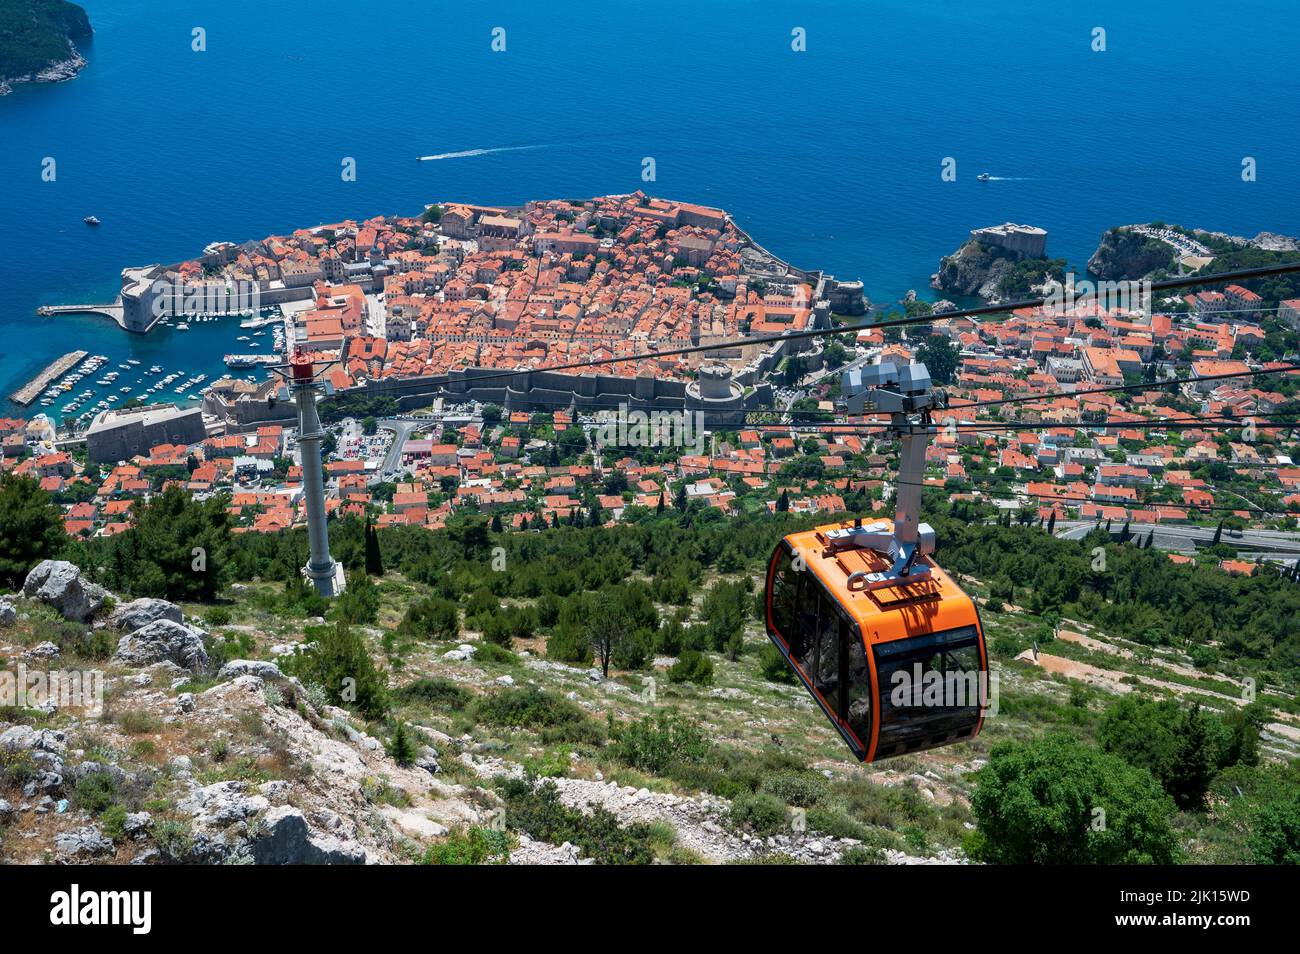 Elevated view of the Old Tow, UNESCO World Heritage Site, with cable car, Dubrovnik, Croatia, Europe Stock Photo